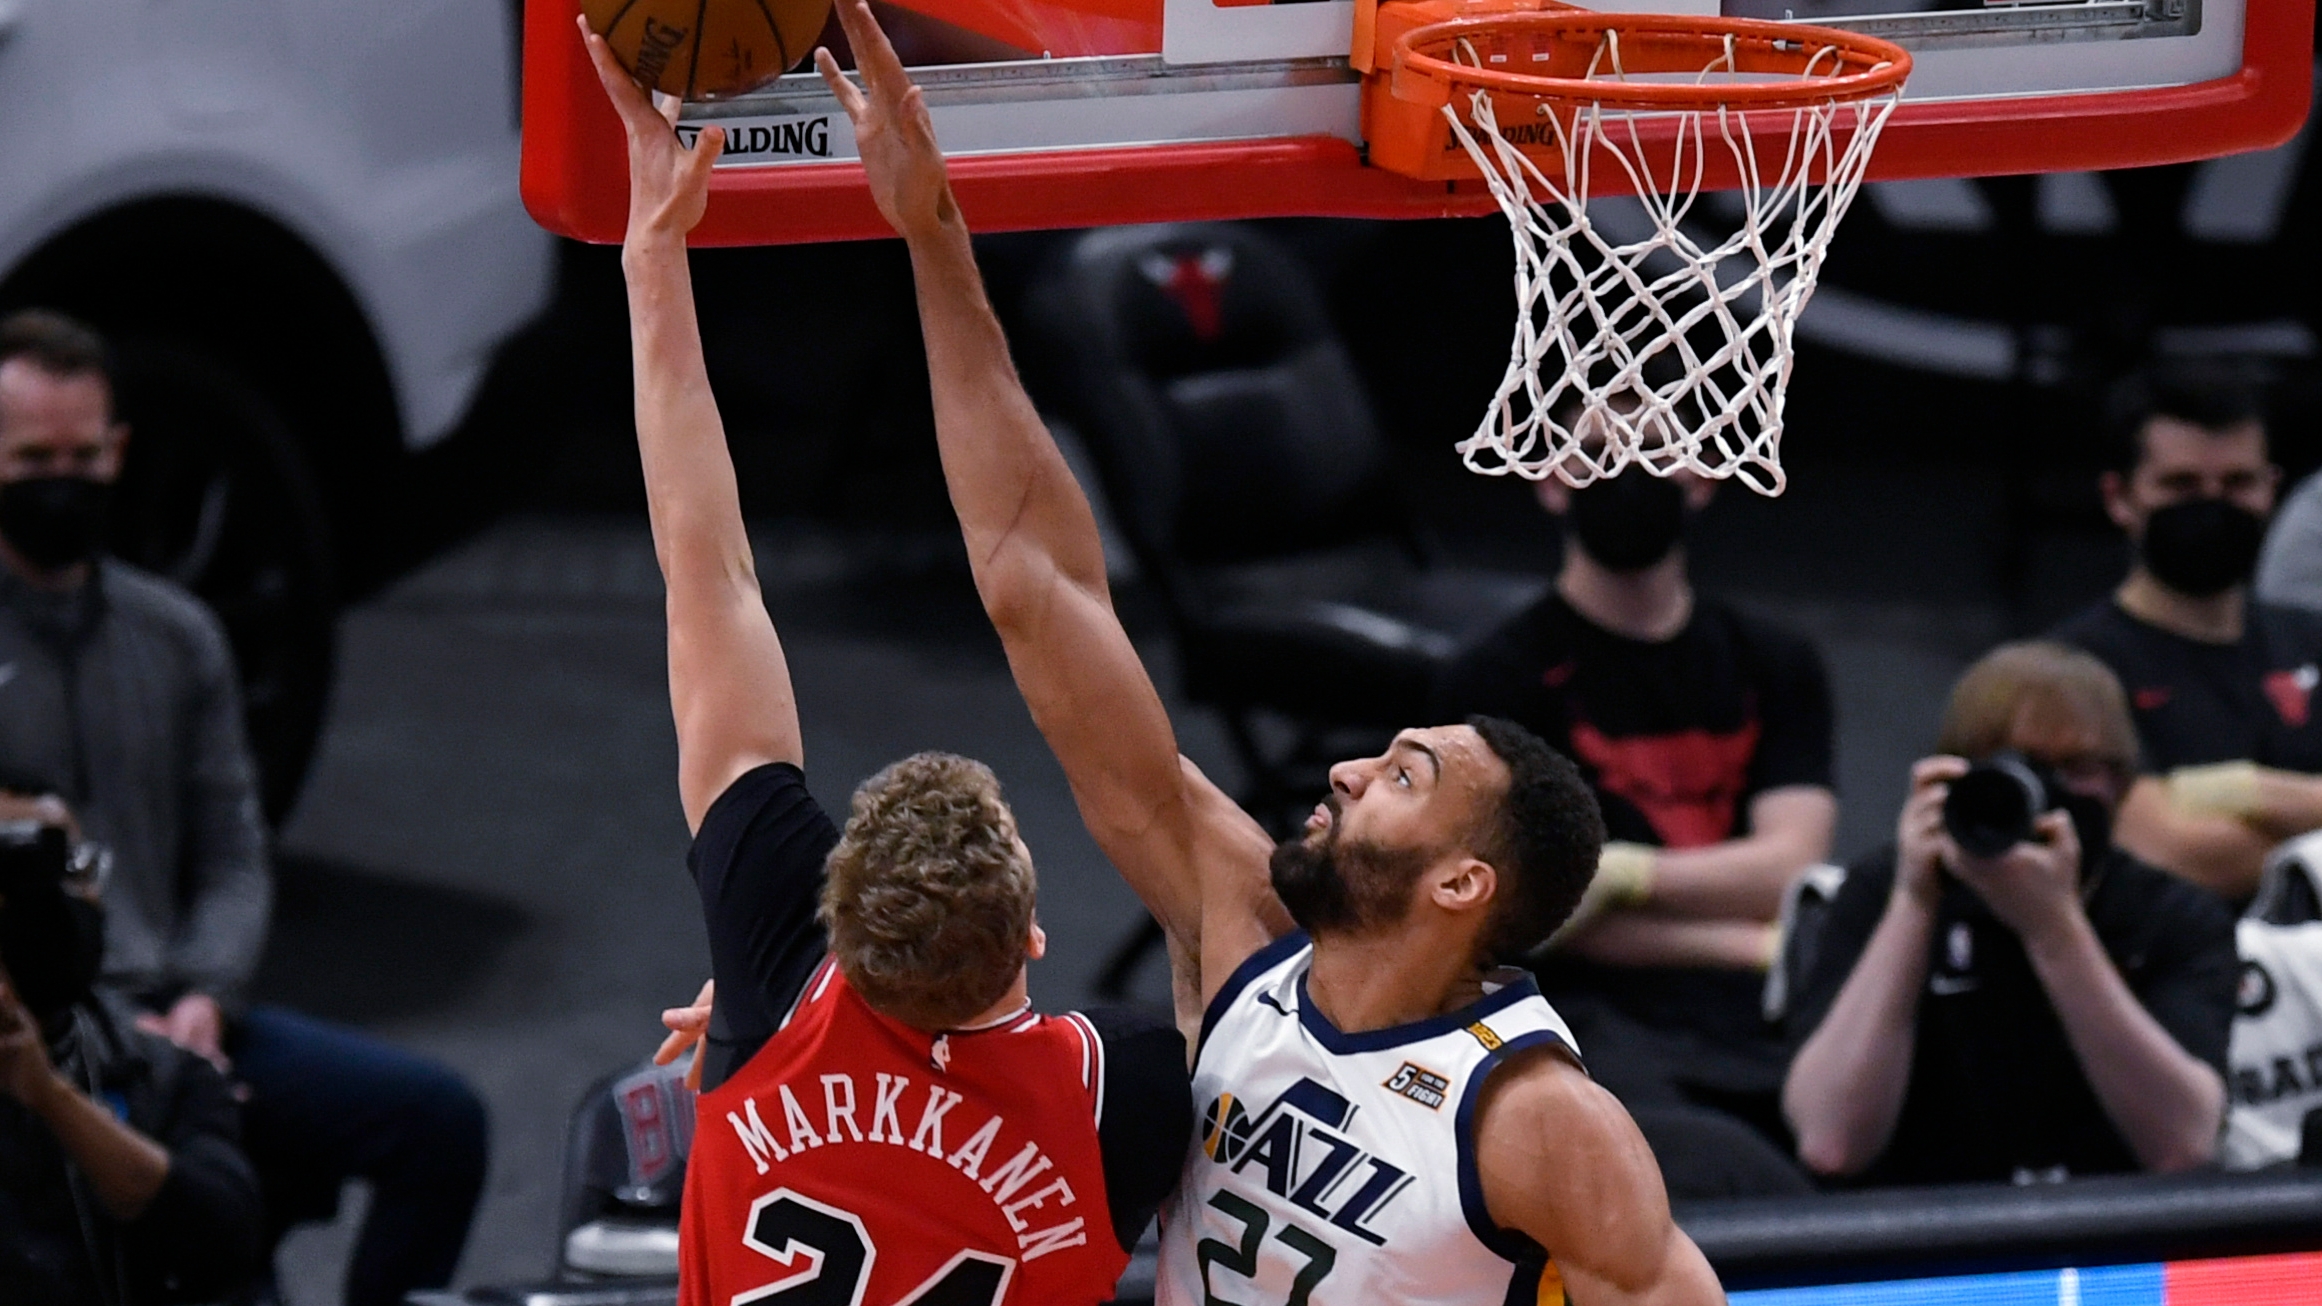 Derrick Favors seeks to return to the NBA with the Chicago Bulls